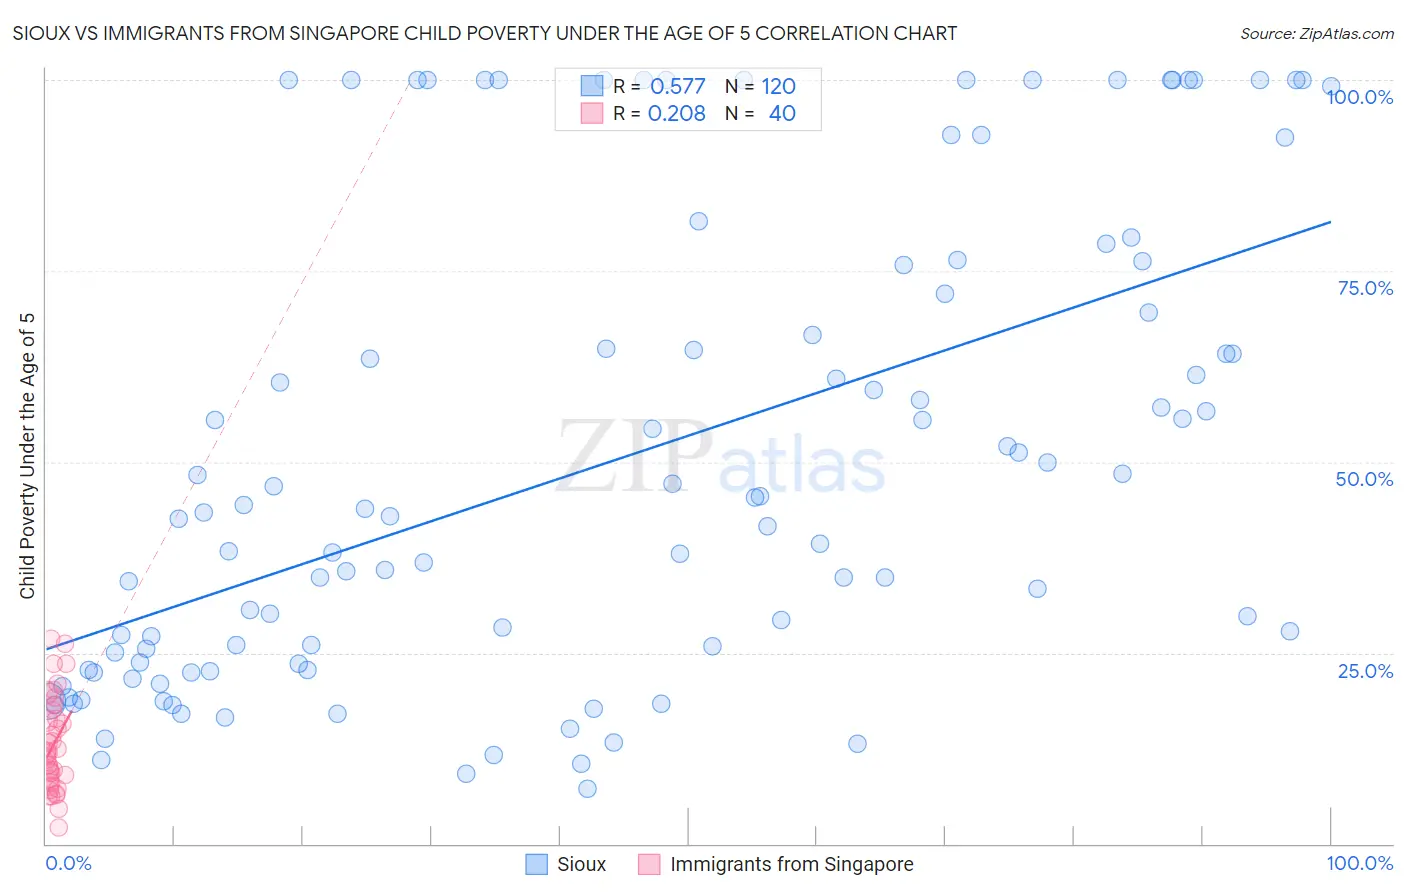 Sioux vs Immigrants from Singapore Child Poverty Under the Age of 5